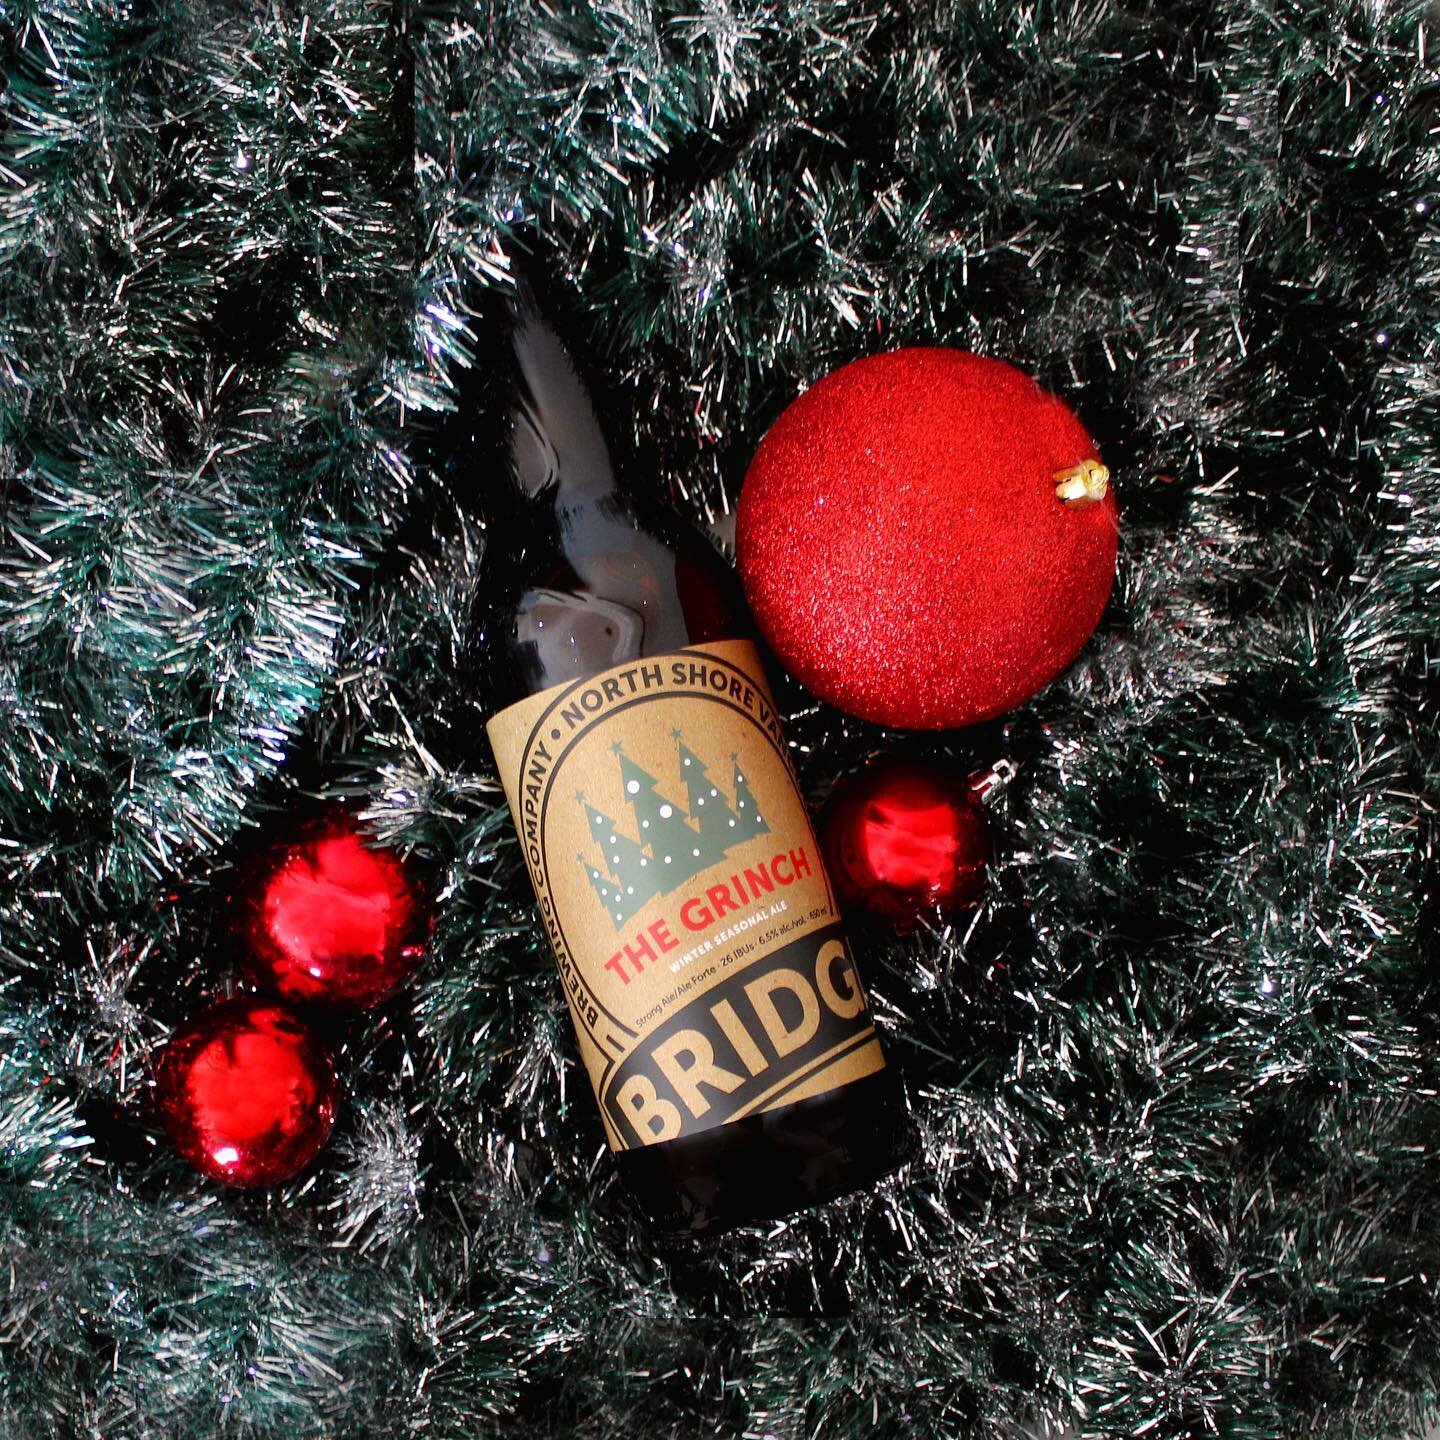 🎁The Grinch Winter Ale🎄 
6.5% | 20IBU

You&rsquo;re the&hellip; the&hellip; the&hellip; THE GRINCH! Our famous winter ale is back and stocked up at liquor stores! This robust porter is spiced delicately with cinnamon, vanilla, and oak. The Grinch i